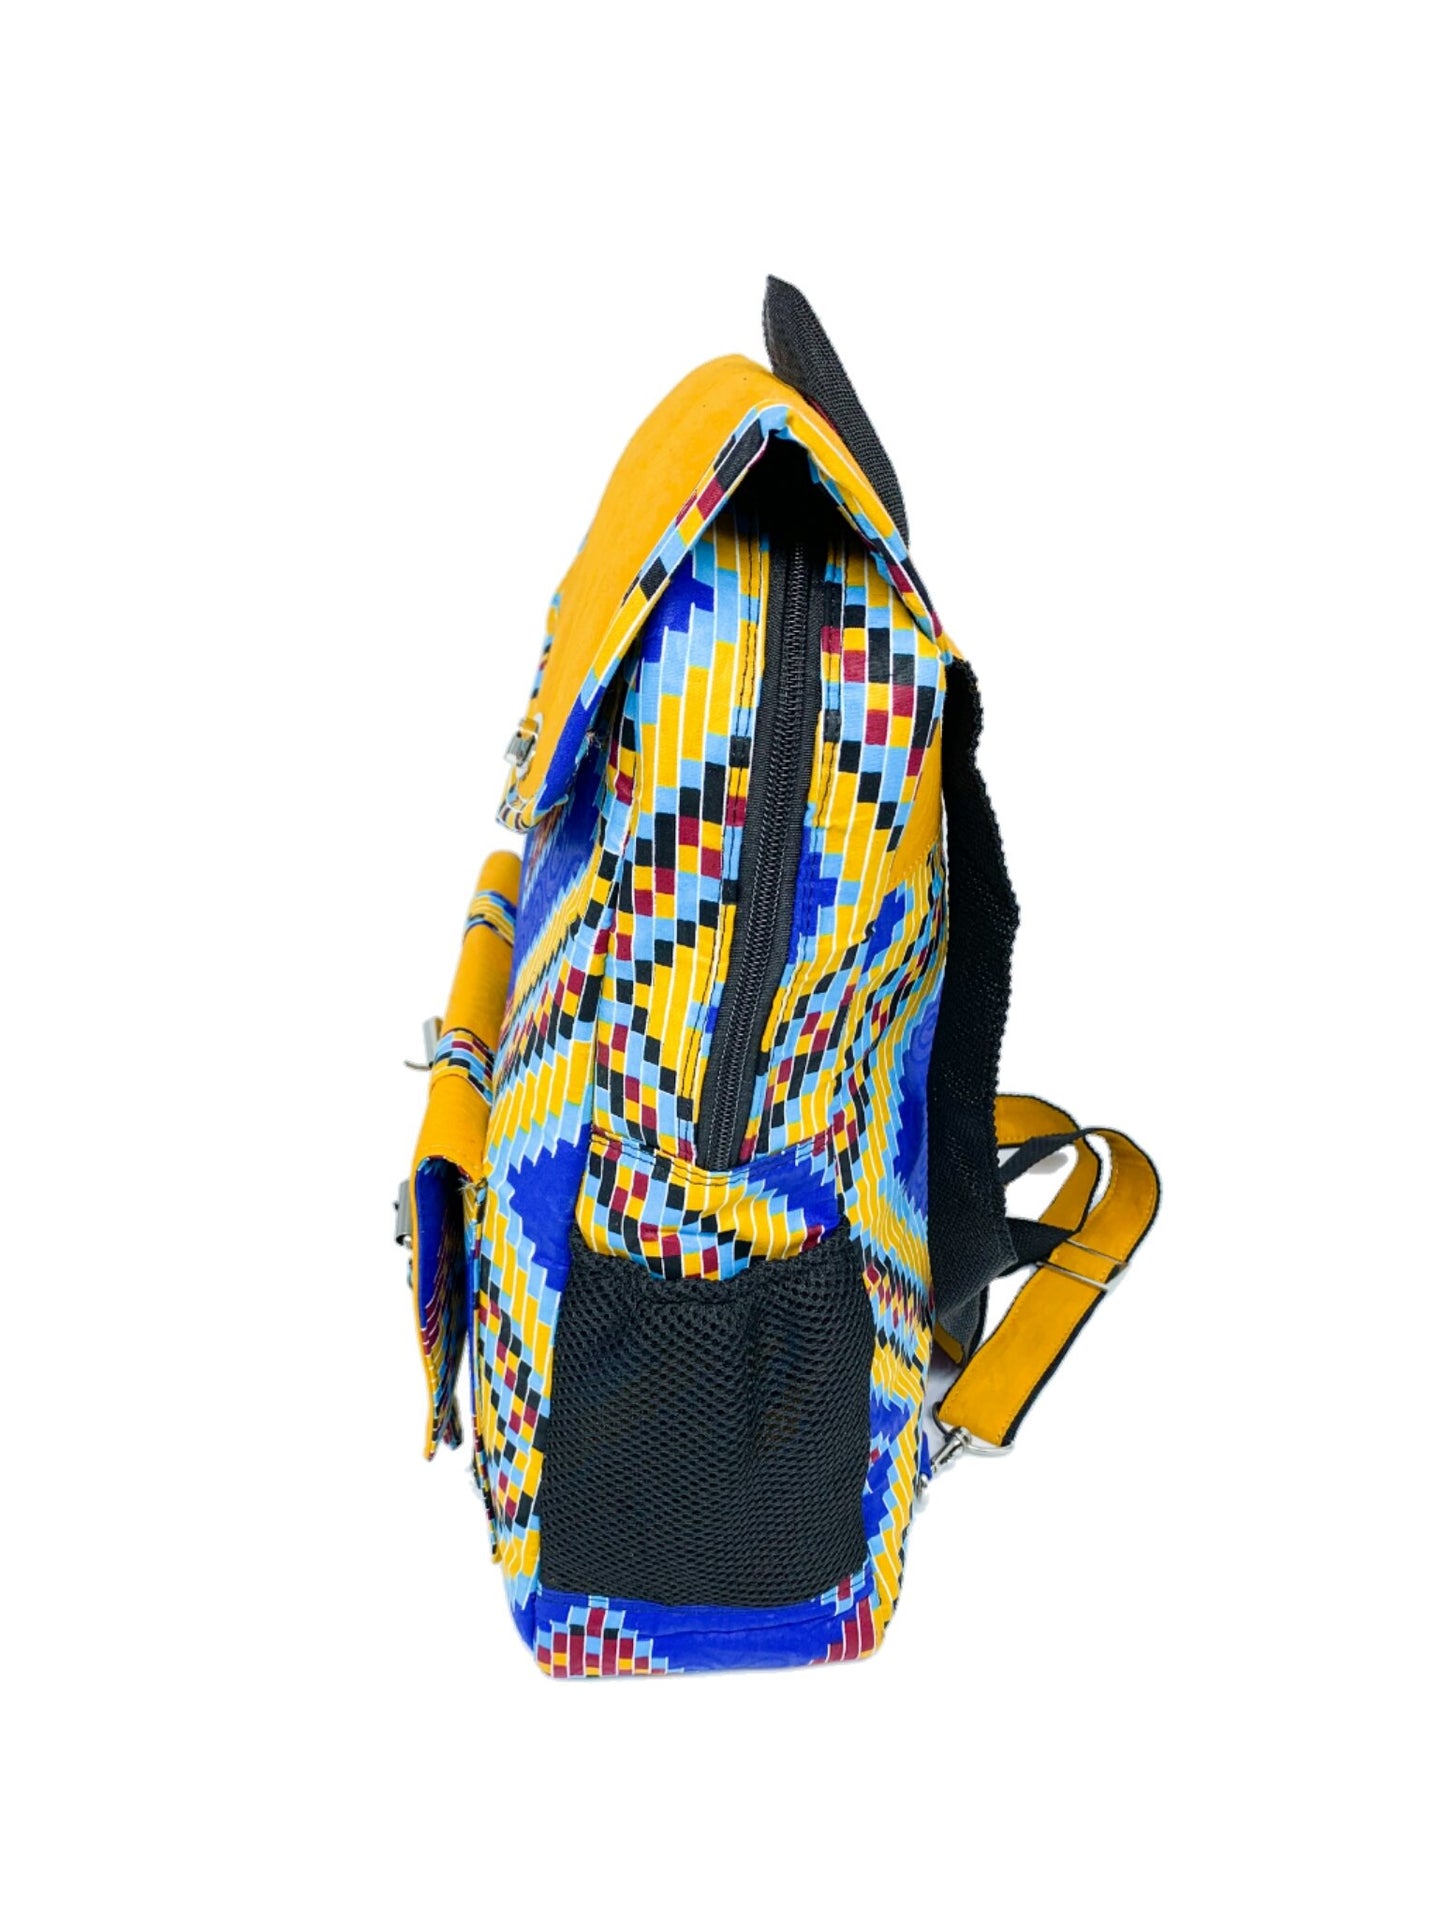 Convertible Backpack with Ankara African Fabric - Weekend Bag for Mom. Boho Tote or Cross Body Duffle Bag for Office, Wife Birthday, Gift for Her